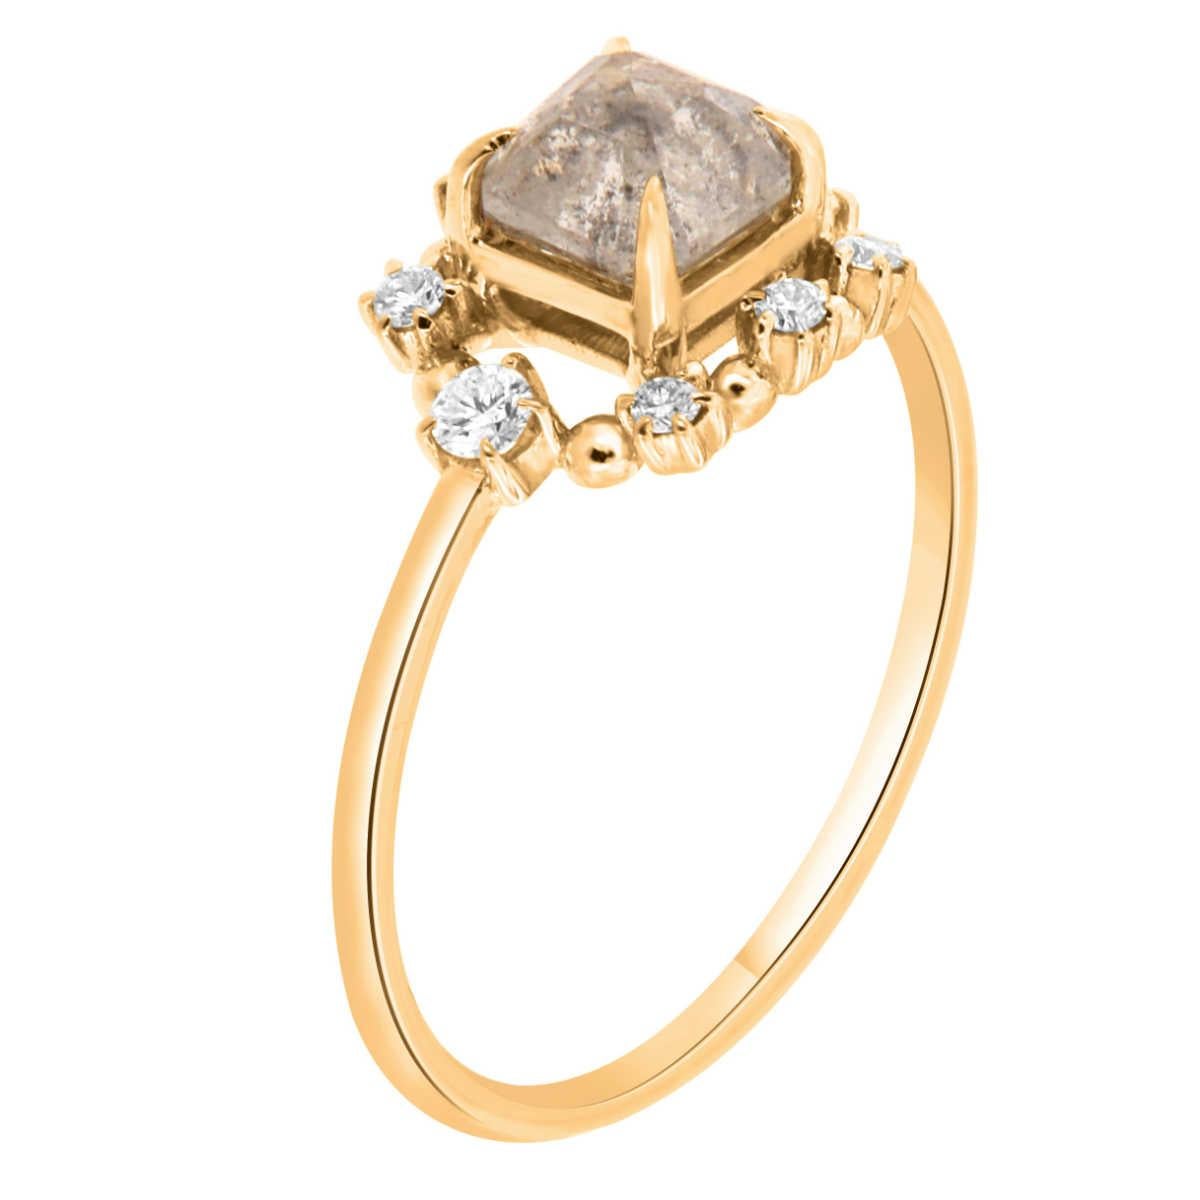 This 14k yellow gold delicate rustic ring features a 0.82 Carat Square Emerald shape Salt & Pepper Natural Diamond set upside down encircled by a halo of eight (8) brilliant round diamonds on top of a 1.2 MM wide band. 
The total diamond weight on